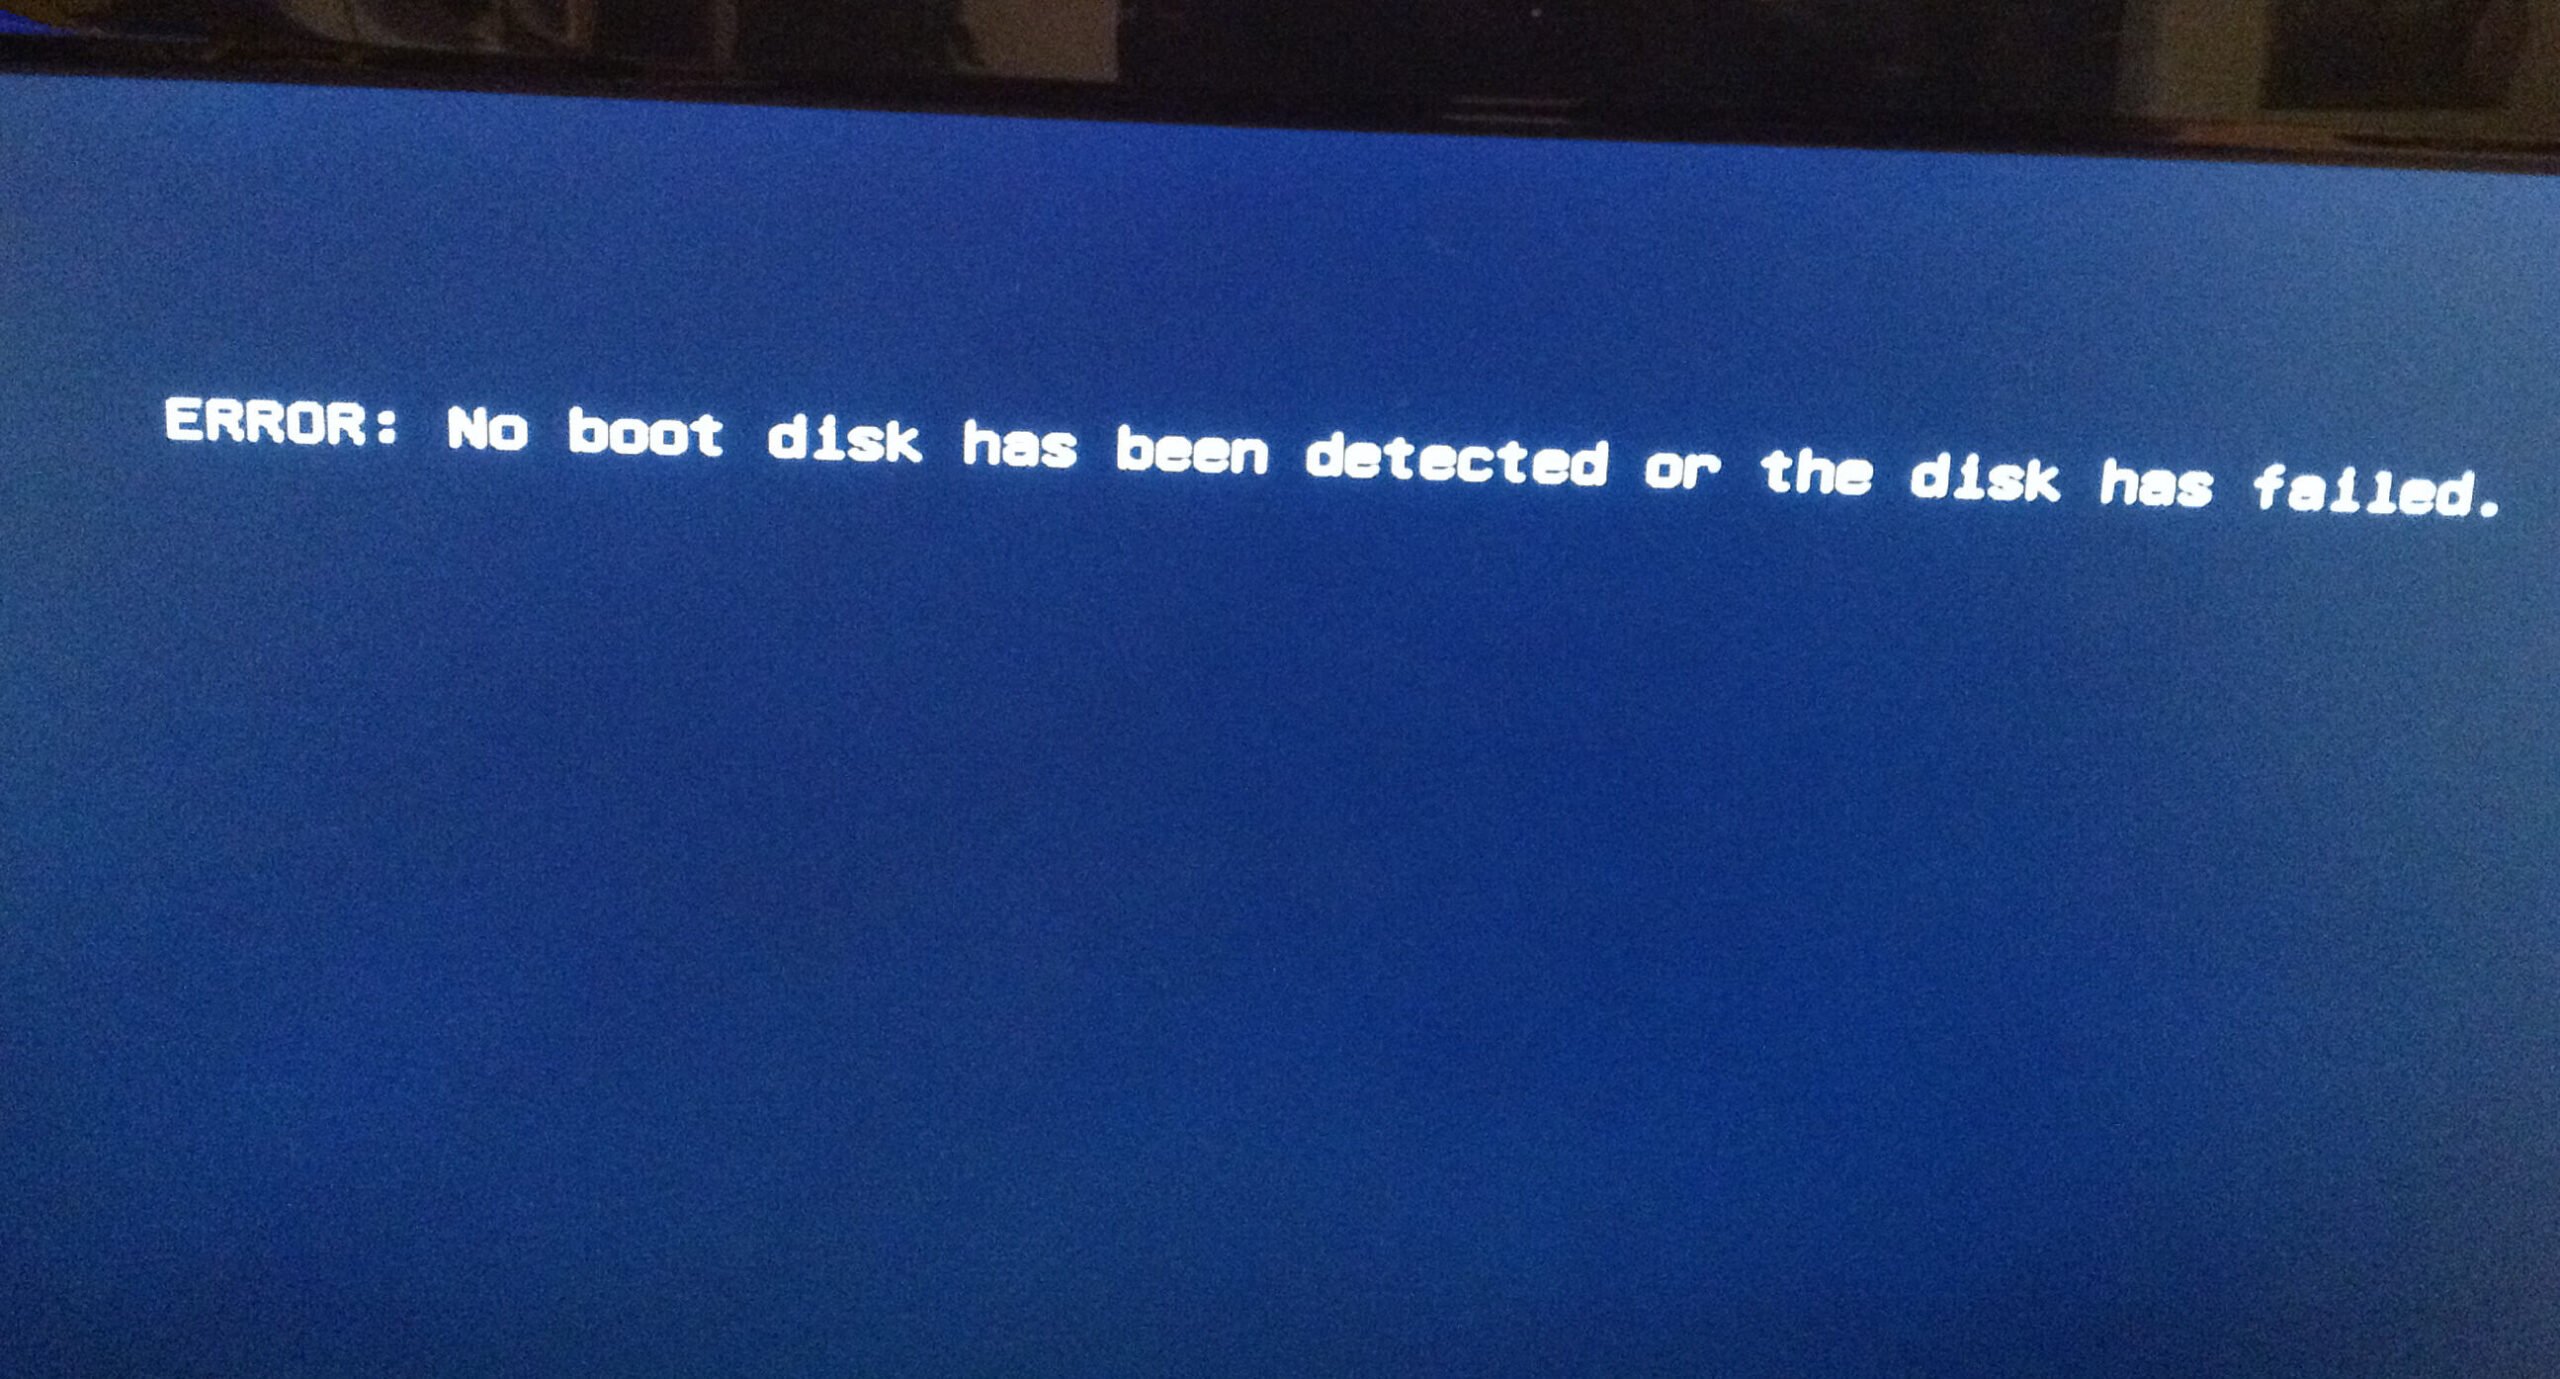 7 Effective Solutions to "No boot disk has been detected or the disk has failed" Error